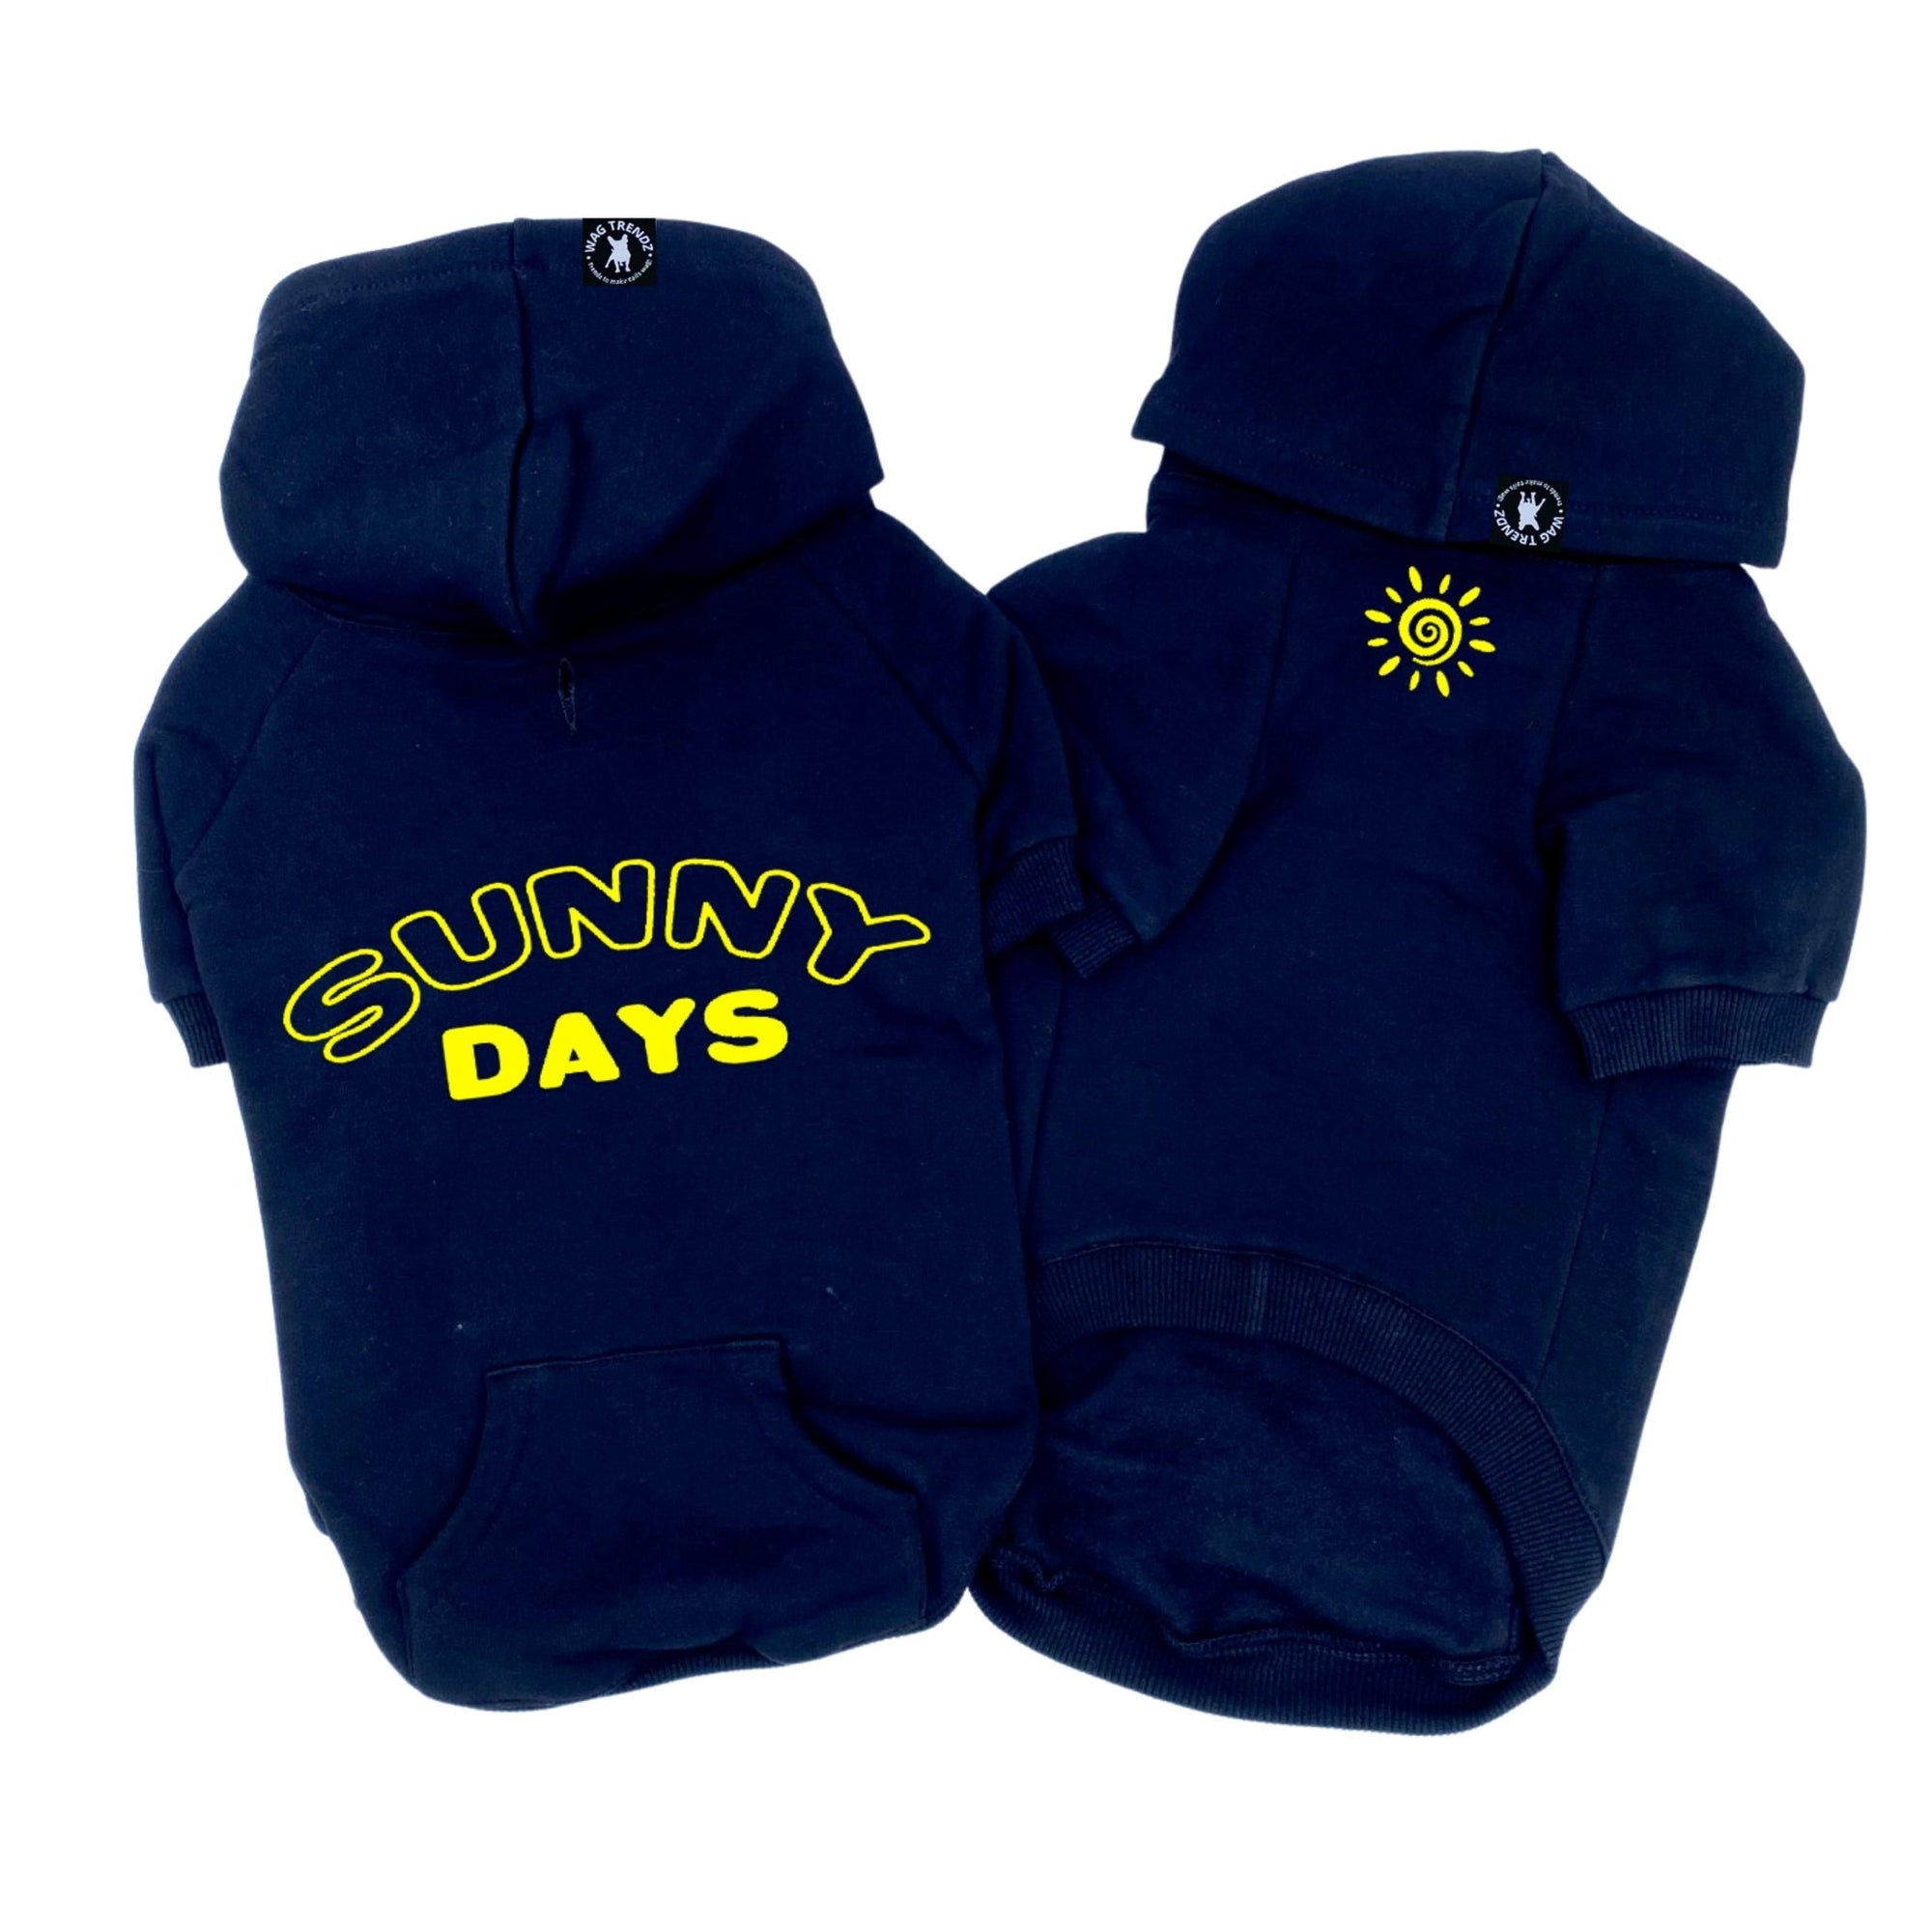 Dog hoodie - Hoodies For Dogs - &quot;Sunny Days&quot; dog hoodies in black set - back view says Sunny Days in yellow and front view has a modern yellow sunshine emoji - against solid white background - Wag Trendz